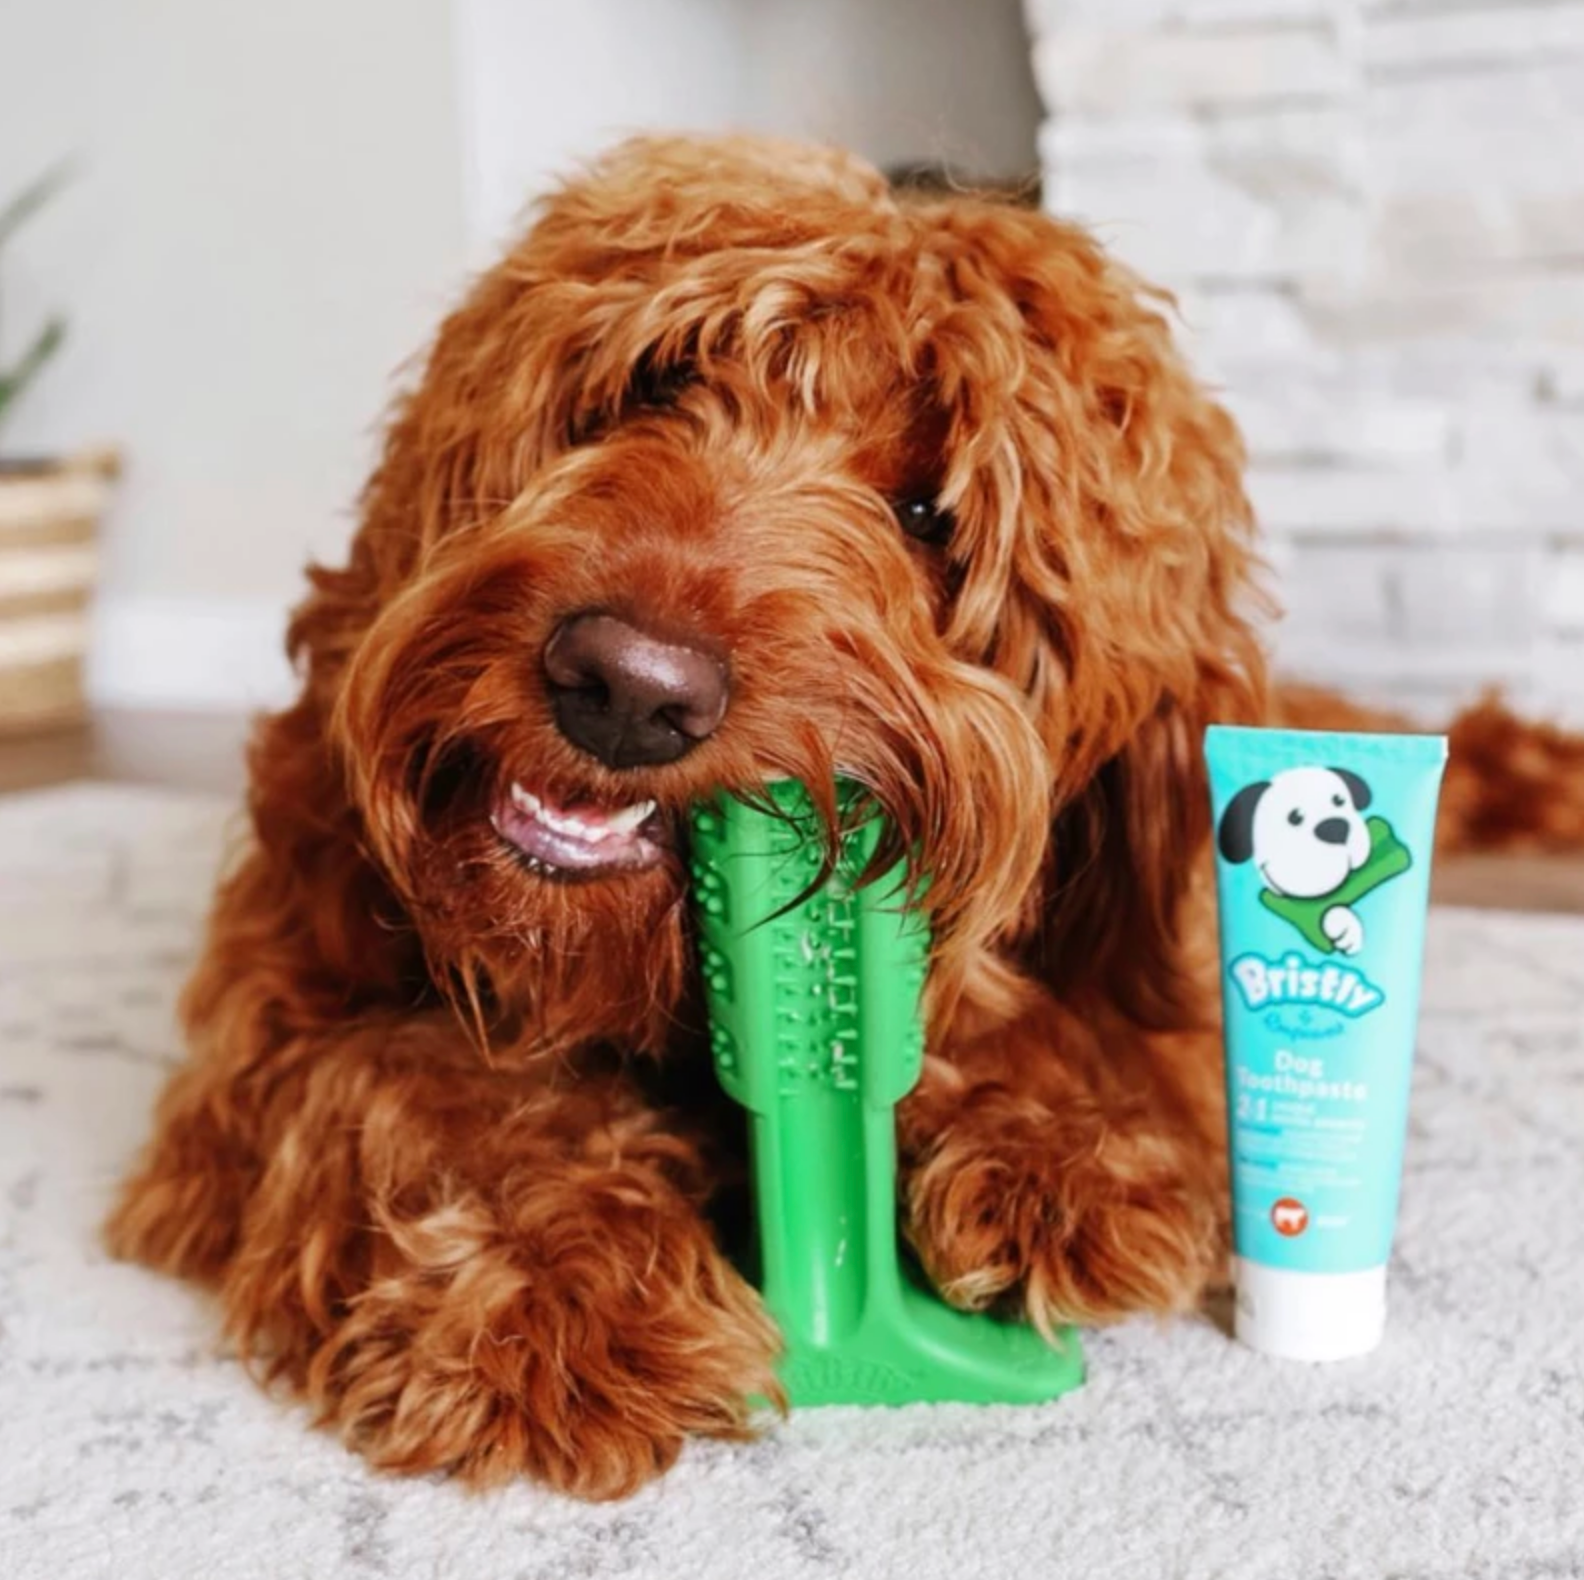 bristly brushing stick for dogs